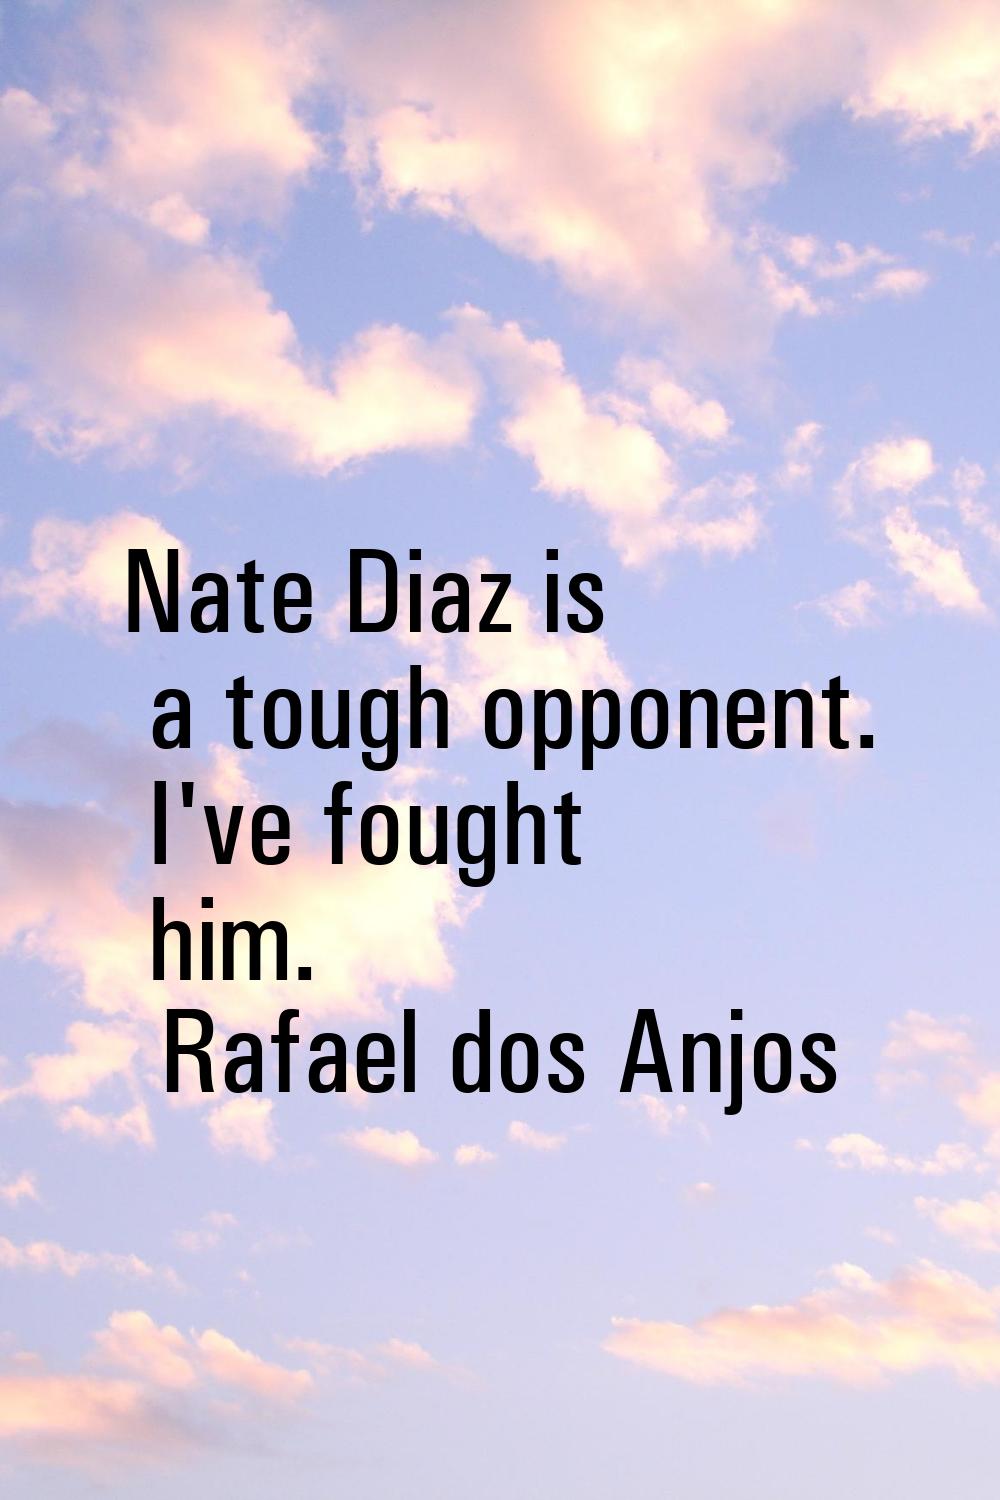 Nate Diaz is a tough opponent. I've fought him.